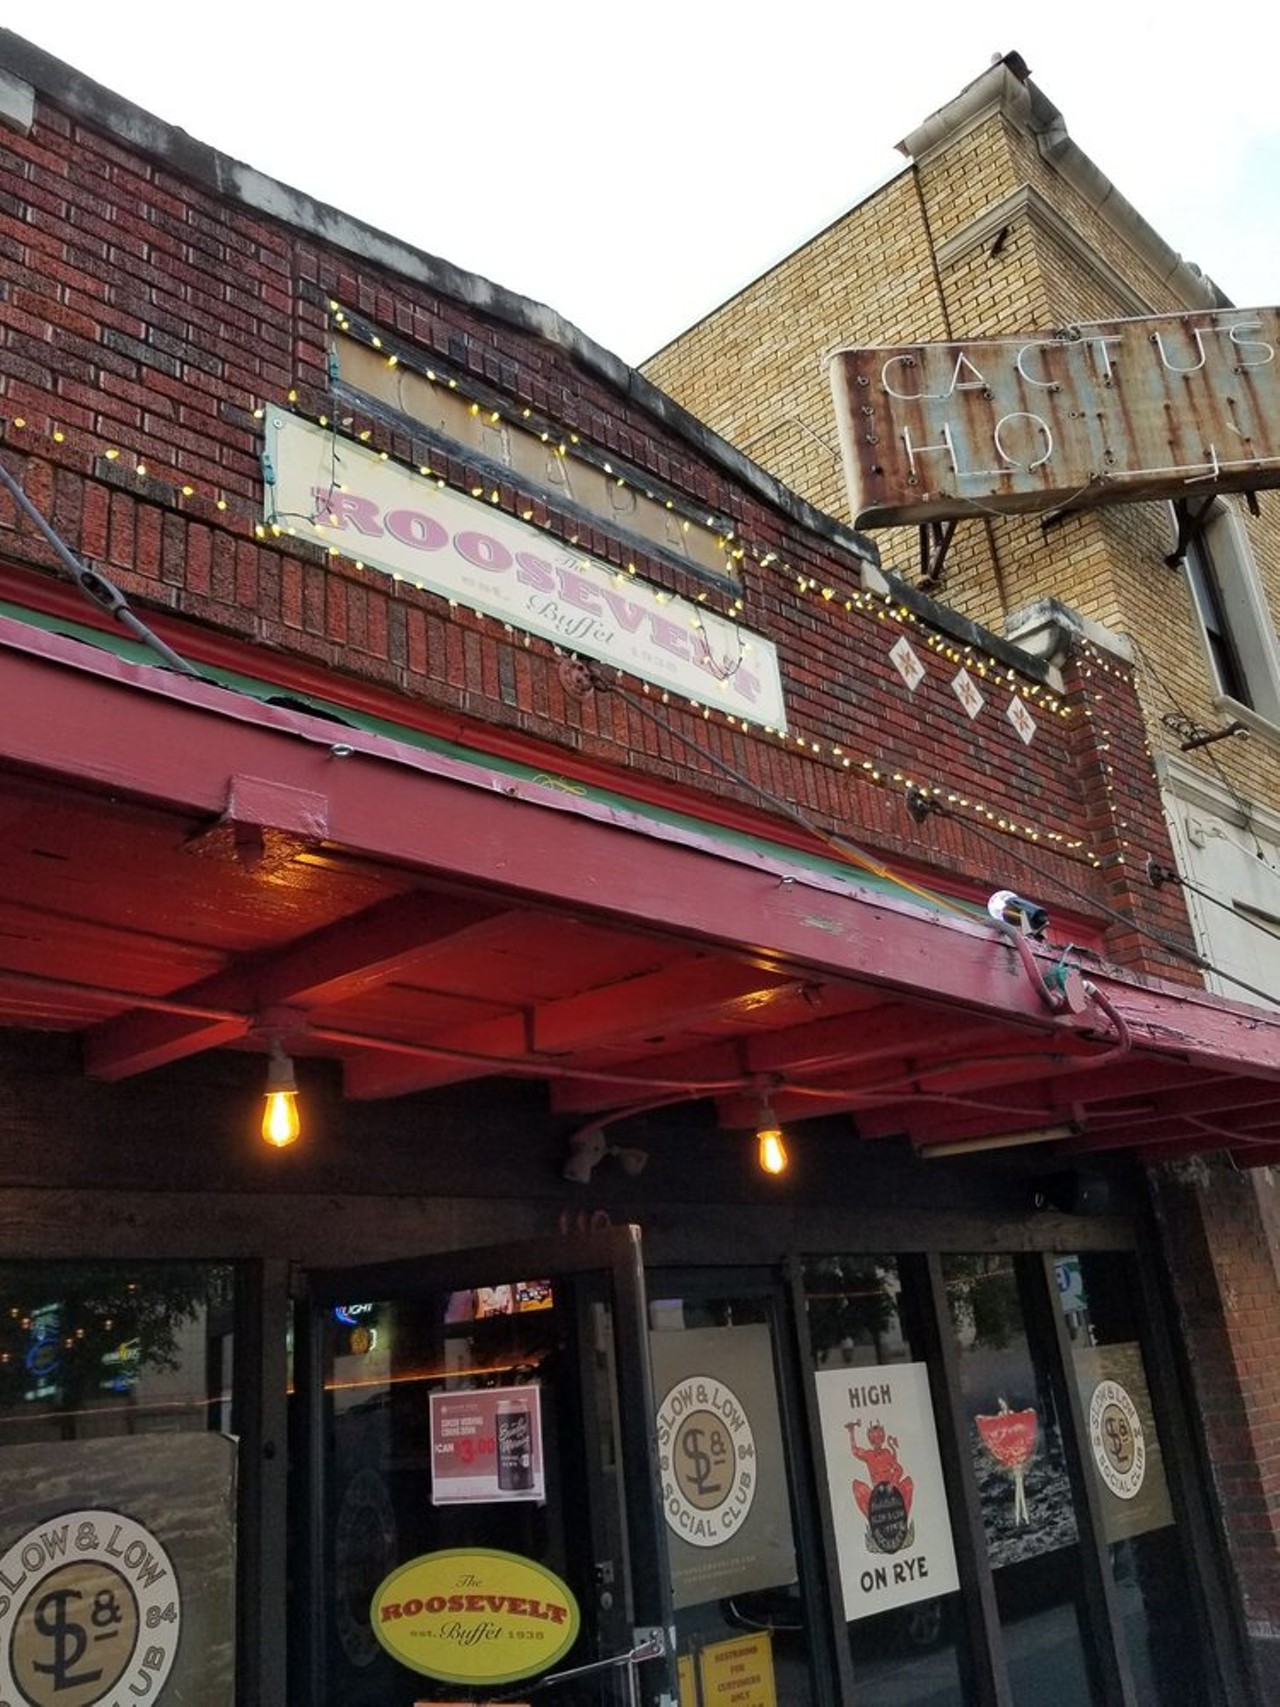 Roosevelt Buffet
SA had to say goodbye to one of its oldest drinking spots. The downtown watering hole, which originally opened as a speakeasy, had served the city for more than 80 years. Operator Anthony Orozco hinted at a possible relocation due to downtown developments and changing interests that caused the family-owned bar’s closure.
Photo via Yelp / Andrea G.